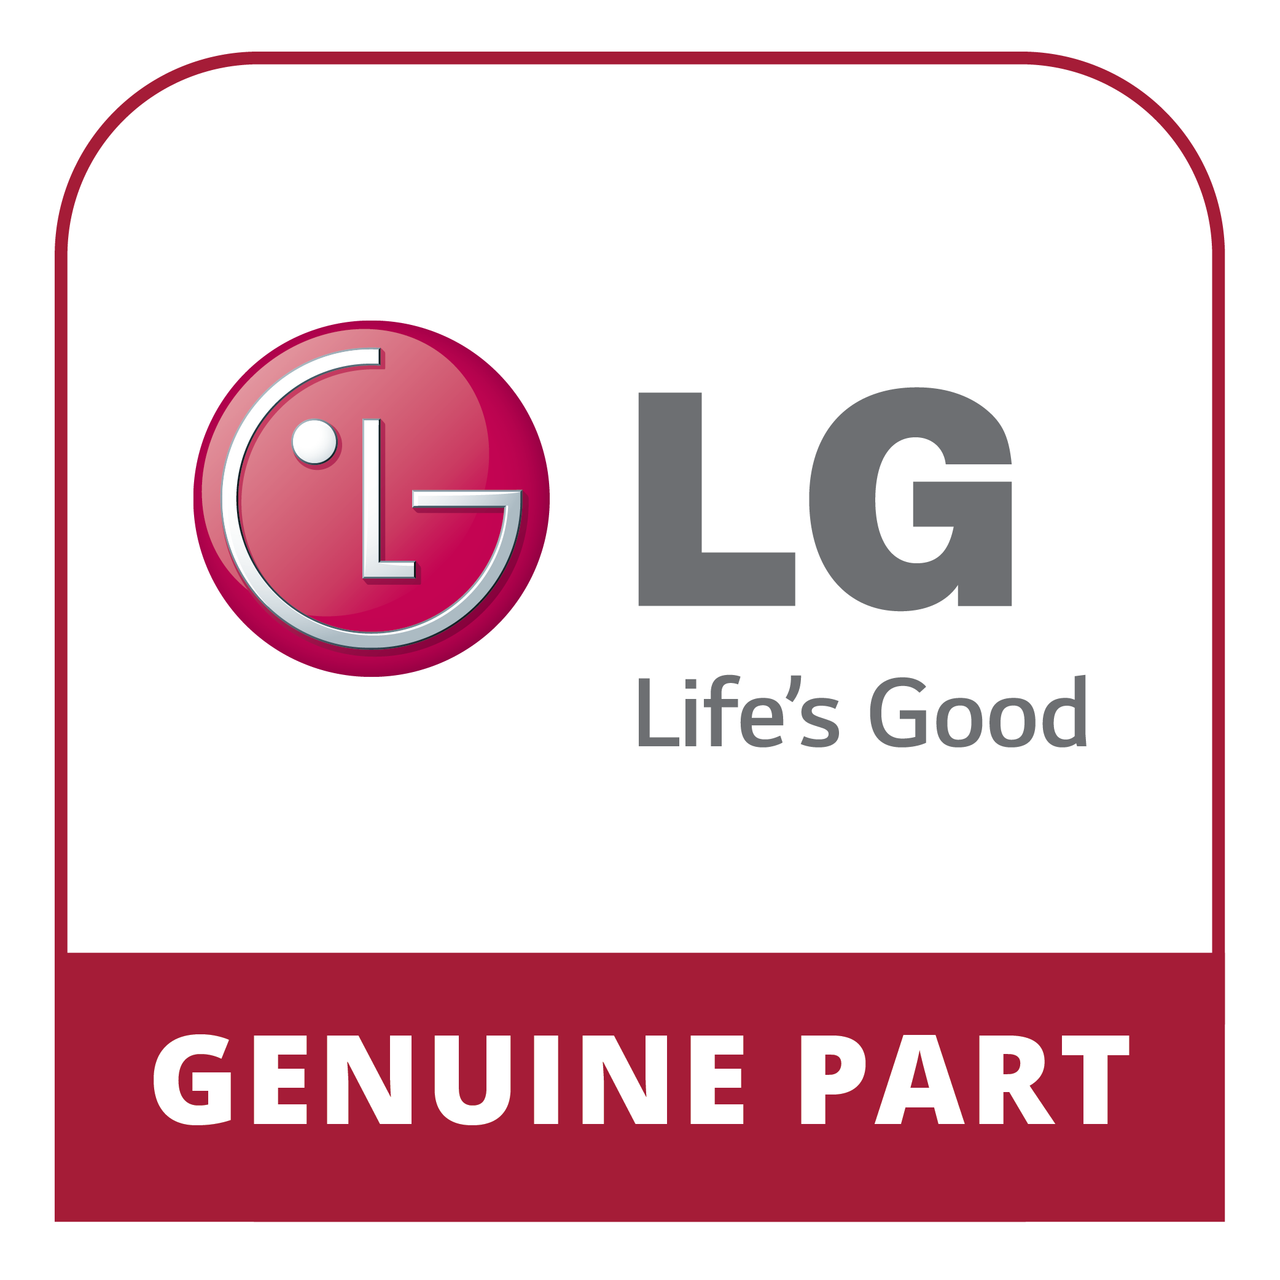 LG 130-013B - Primary Cell Battery,Carbon Zinc - Genuine LG Part